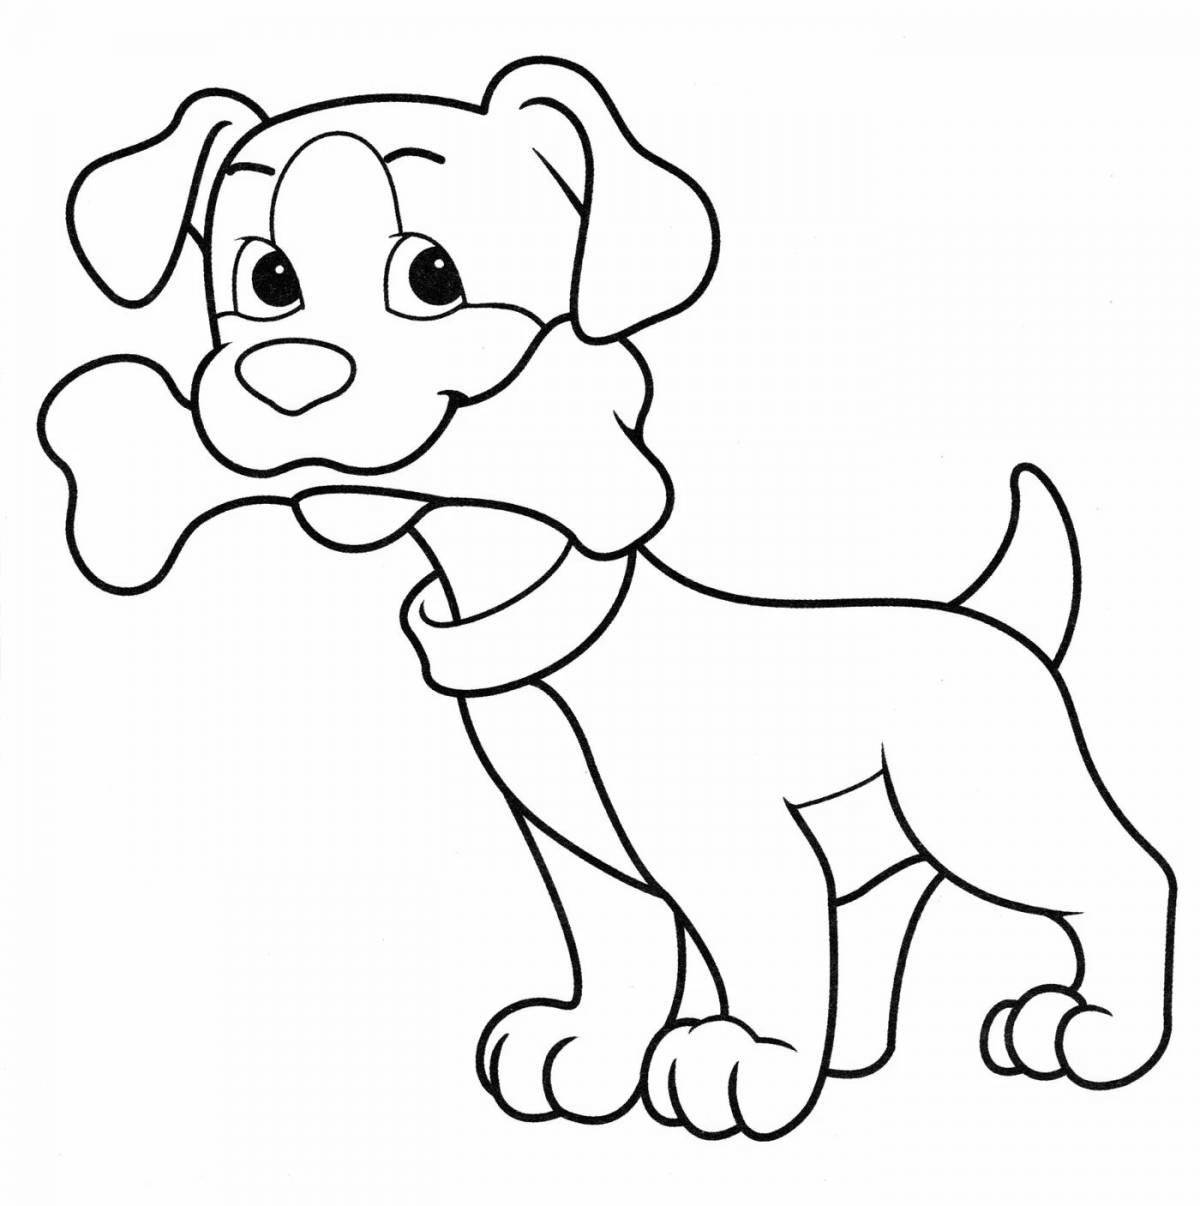 Fun dog coloring for kids